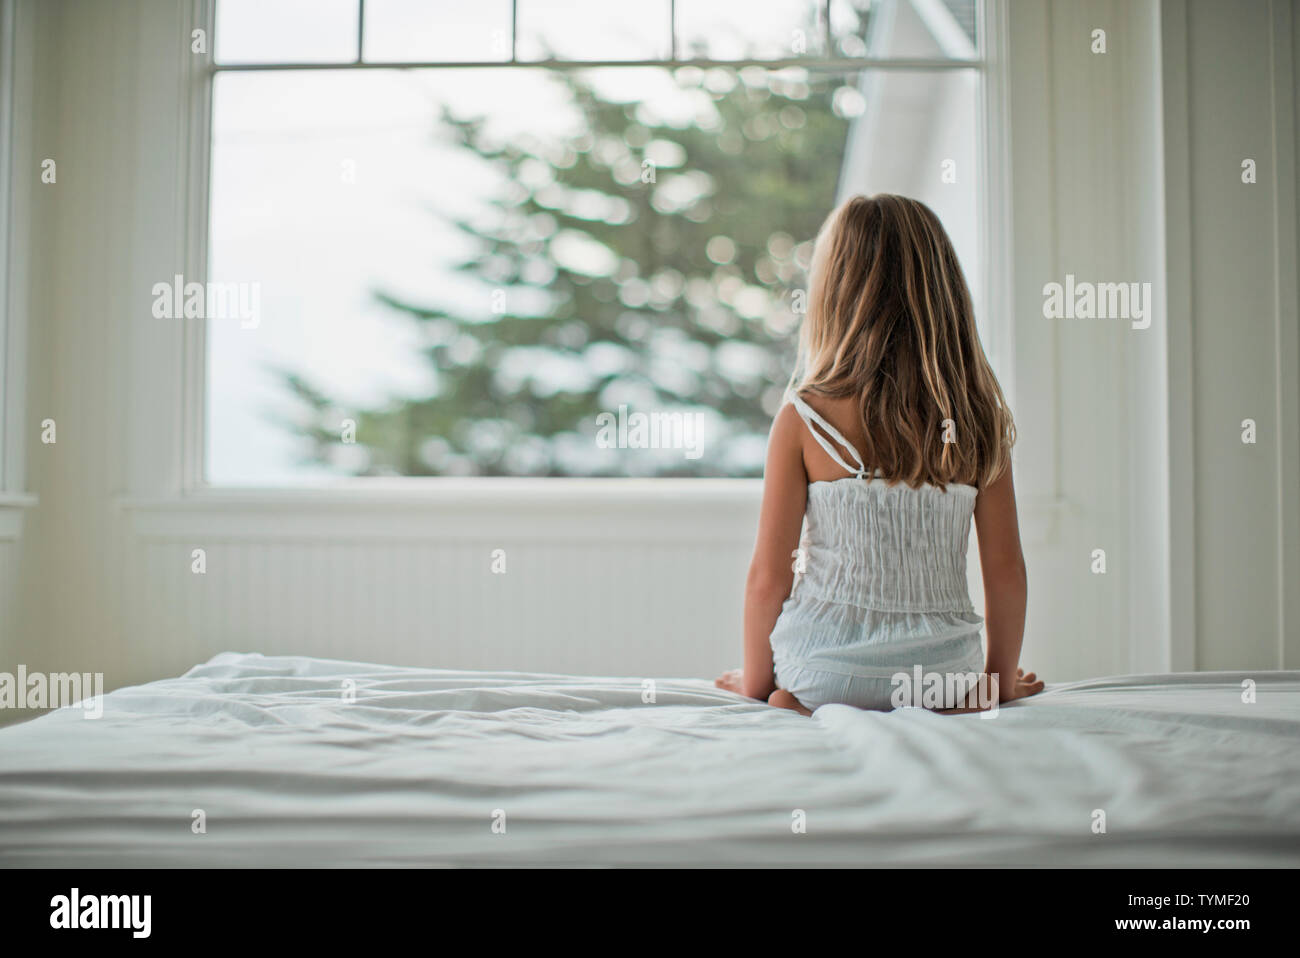 Young girl sitting on a bed. Stock Photo